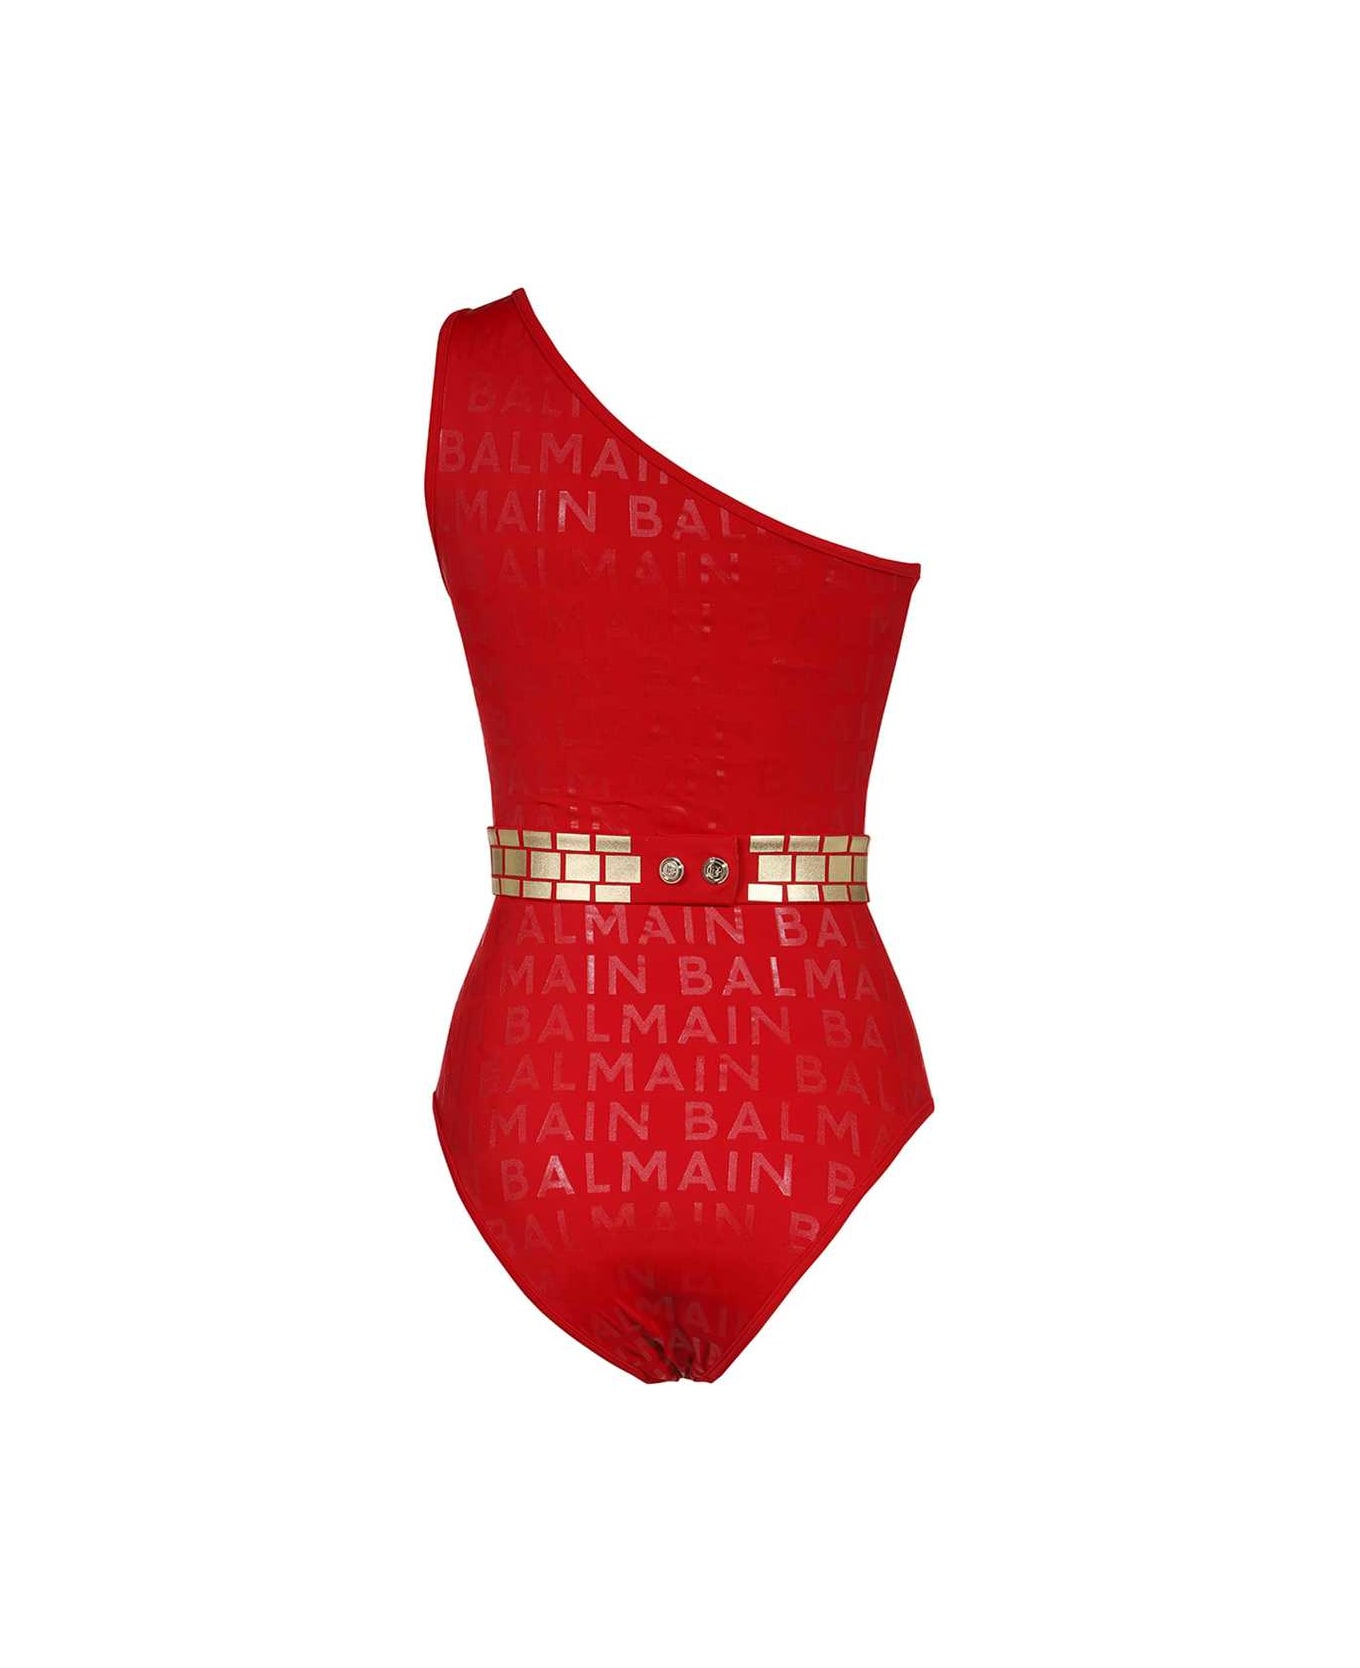 Balmain Printed One-piece Swimsuit - red